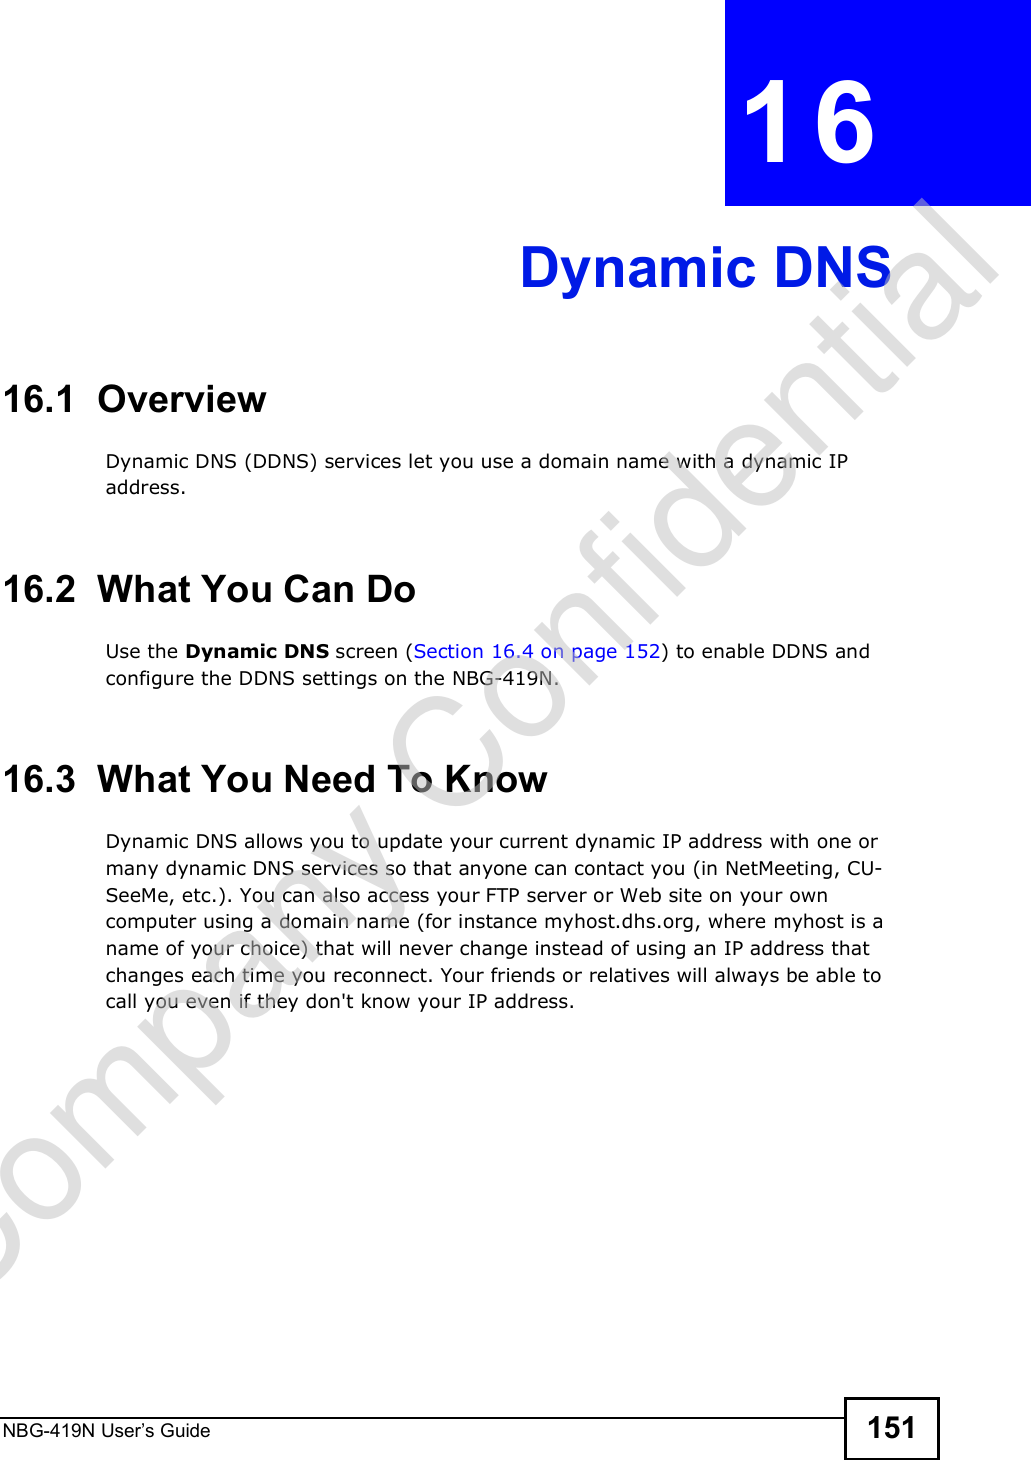 NBG-419N User s Guide 151CHAPTER  16 Dynamic DNS16.1  Overview Dynamic DNS (DDNS) services let you use a domain name with a dynamic IP address.16.2  What You Can DoUse the Dynamic DNS screen (Section 16.4 on page 152) to enable DDNS and configure the DDNS settings on the NBG-419N.16.3  What You Need To KnowDynamic DNS allows you to update your current dynamic IP address with one or many dynamic DNS services so that anyone can contact you (in NetMeeting, CU-SeeMe, etc.). You can also access your FTP server or Web site on your own computer using a domain name (for instance myhost.dhs.org, where myhost is a name of your choice) that will never change instead of using an IP address that changes each time you reconnect. Your friends or relatives will always be able to call you even if they don&apos;t know your IP address.Company Confidential